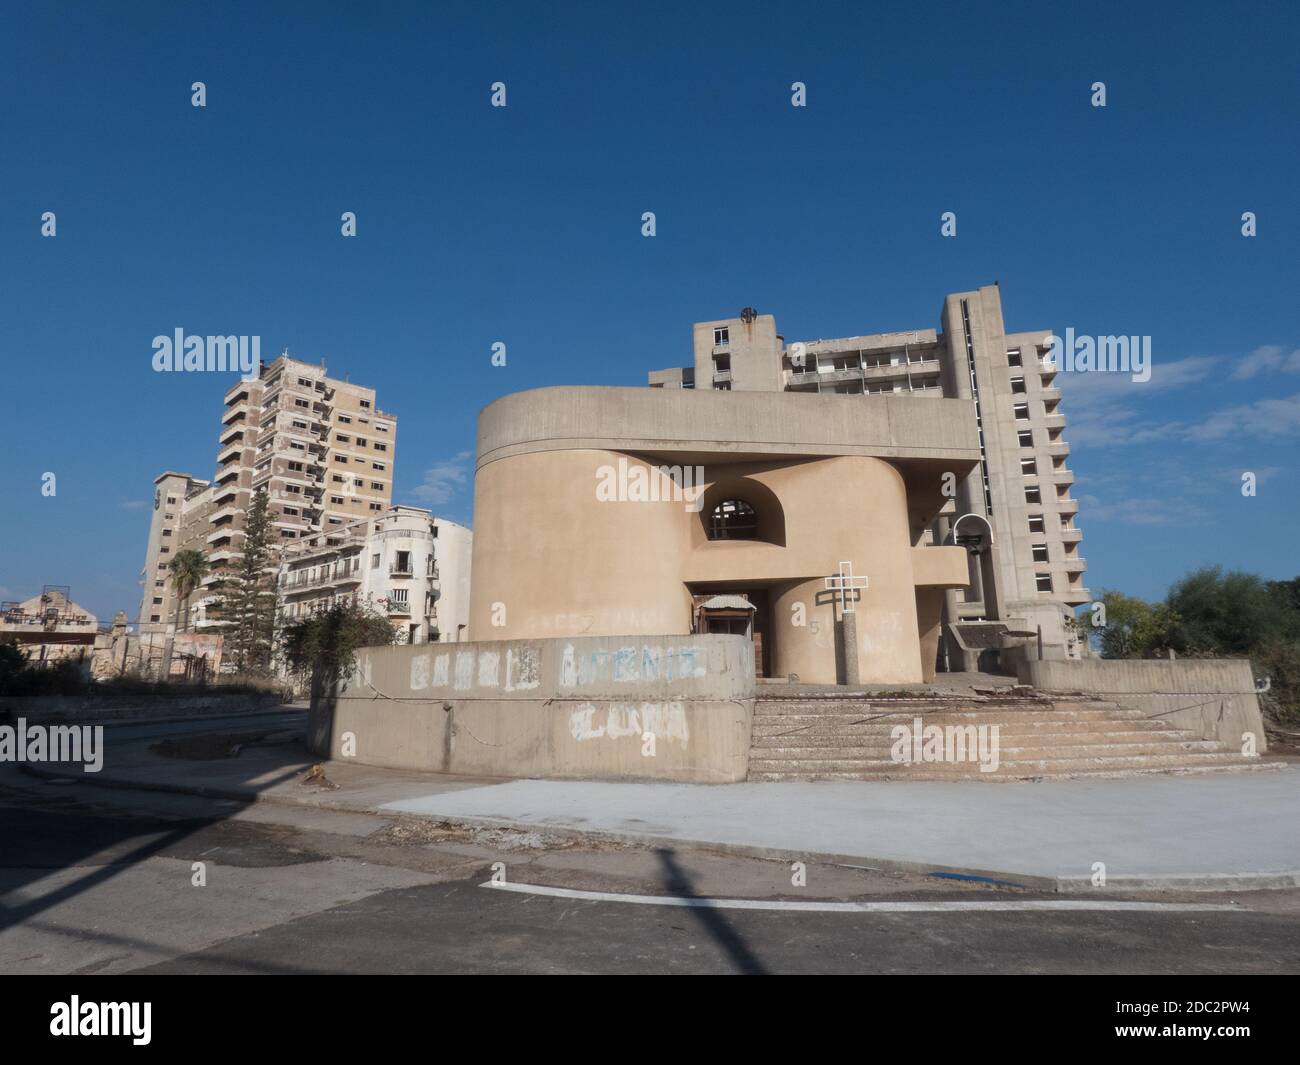 From holiday paradise, to ghost town, Varosha, the Cypriot forbidden city. Pictures Taken November 2020 Stock Photo